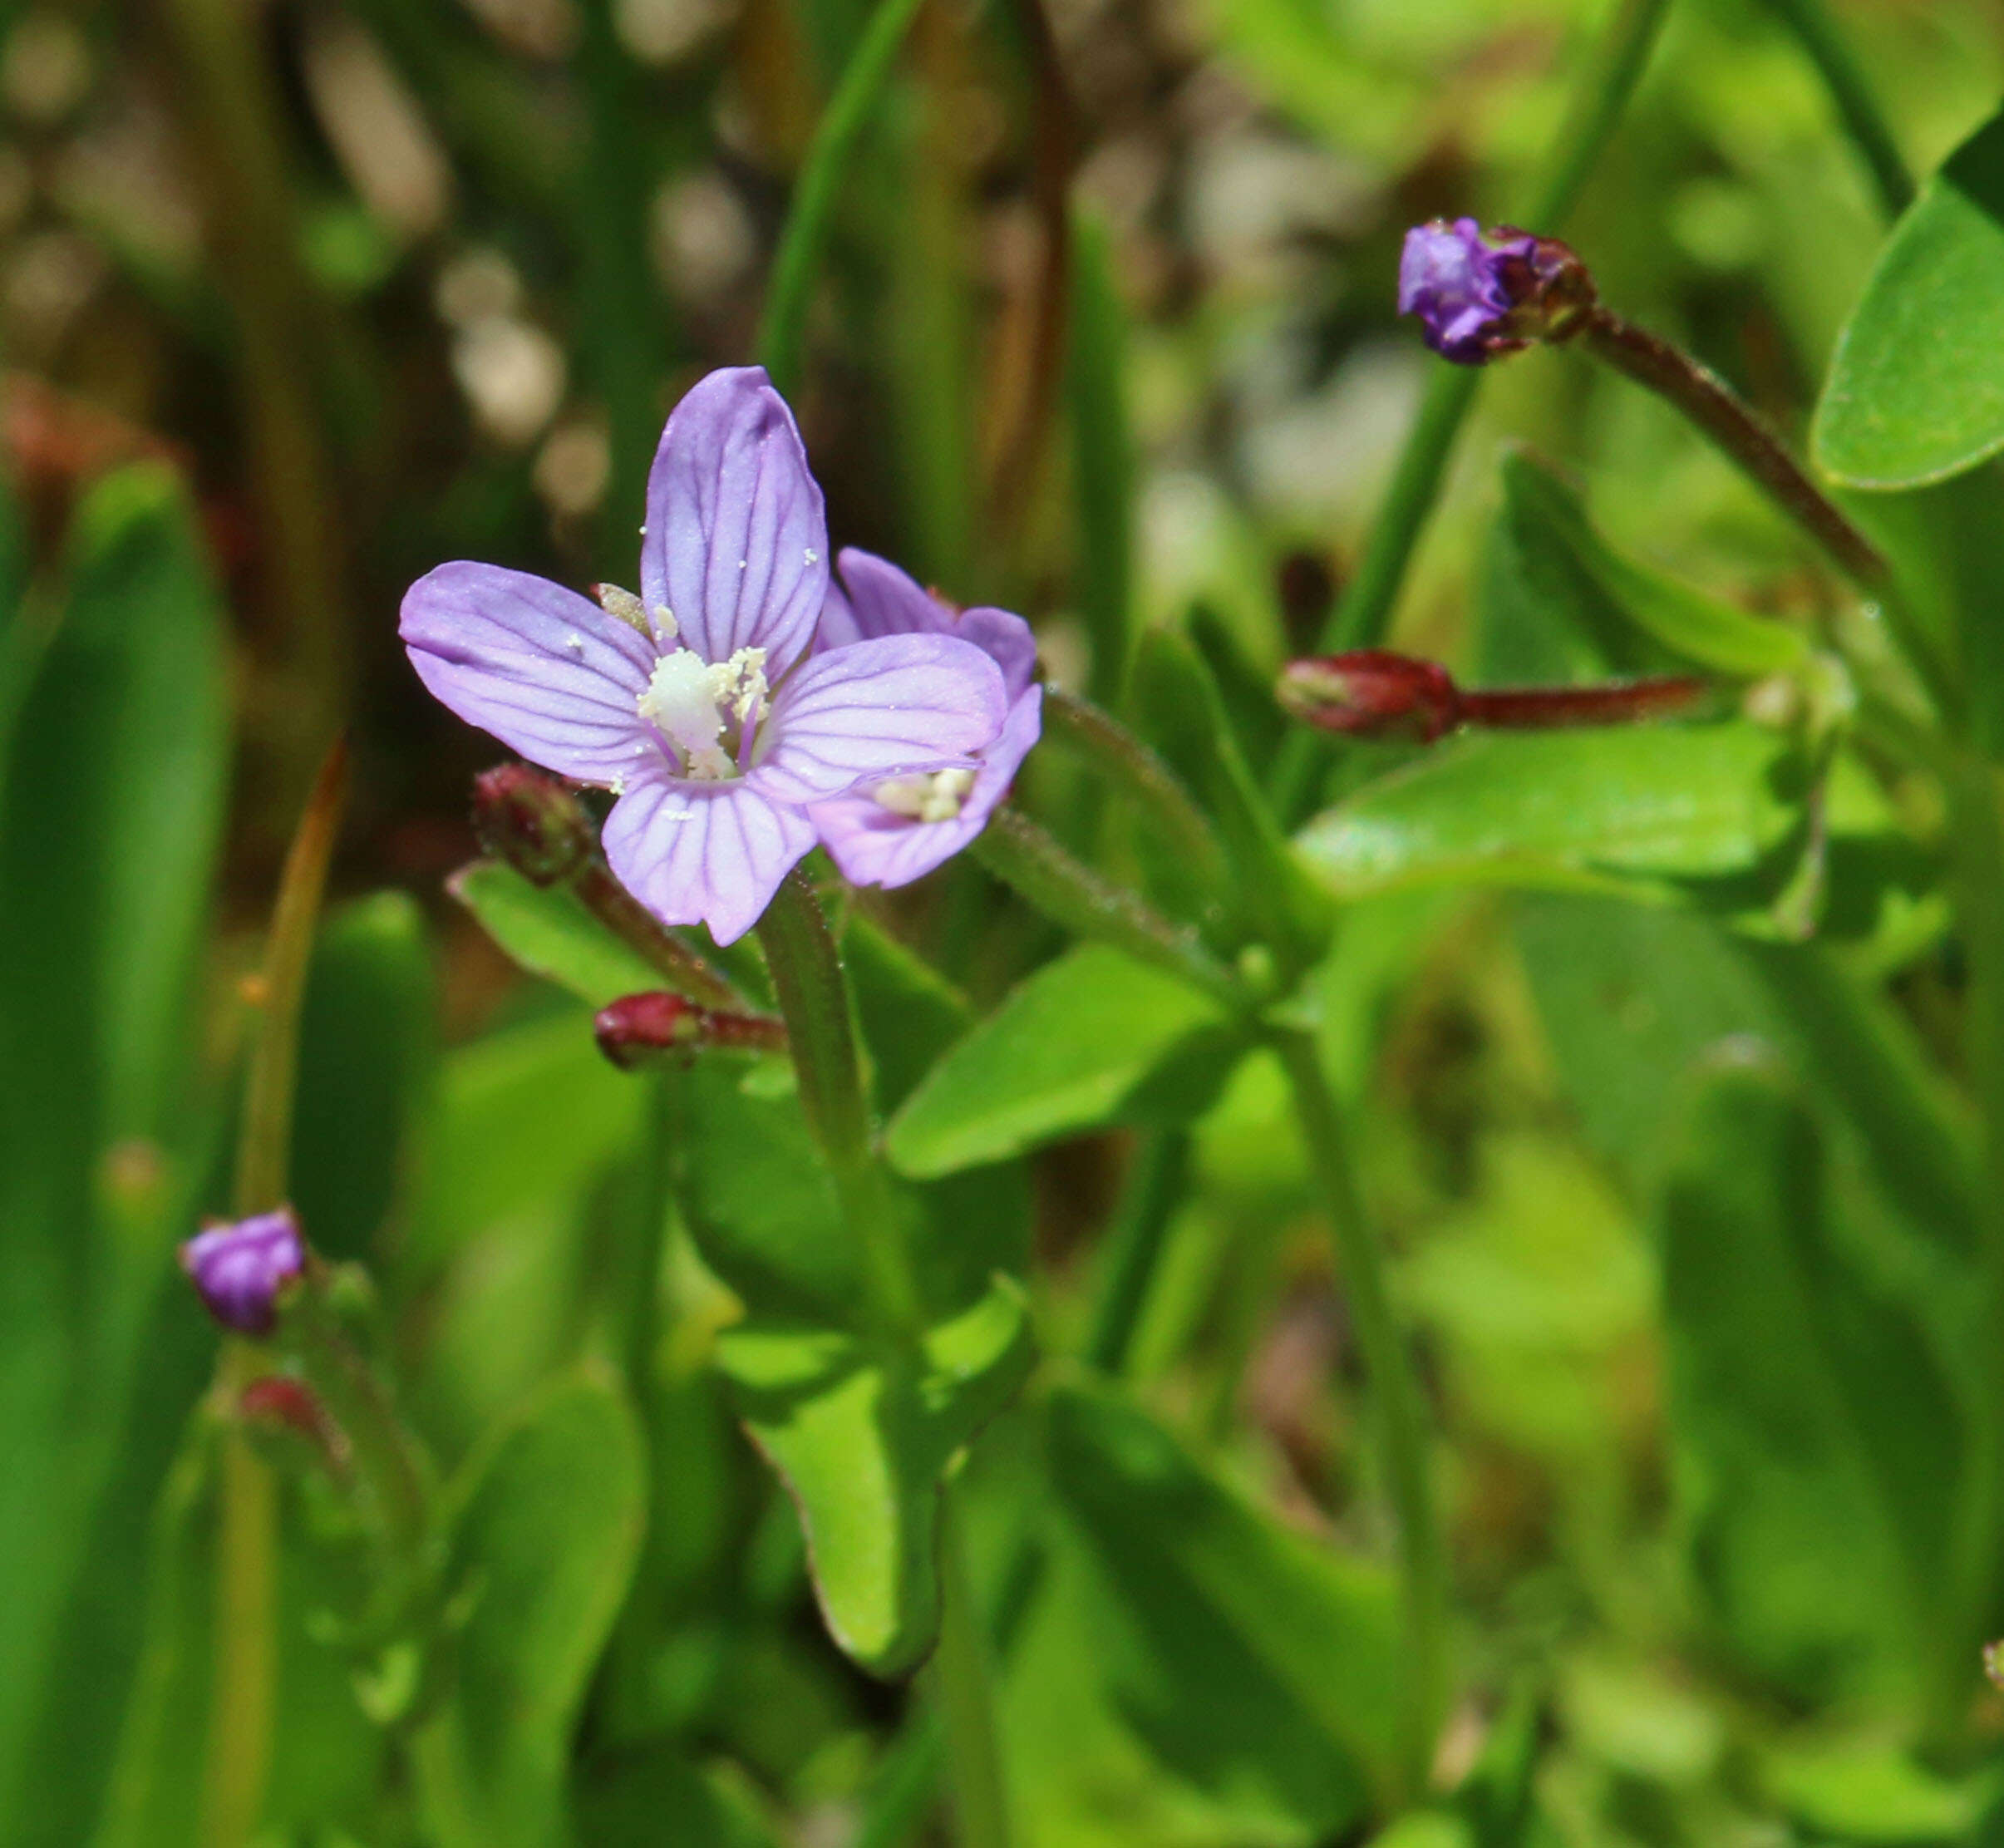 Image of pimpernel willowherb